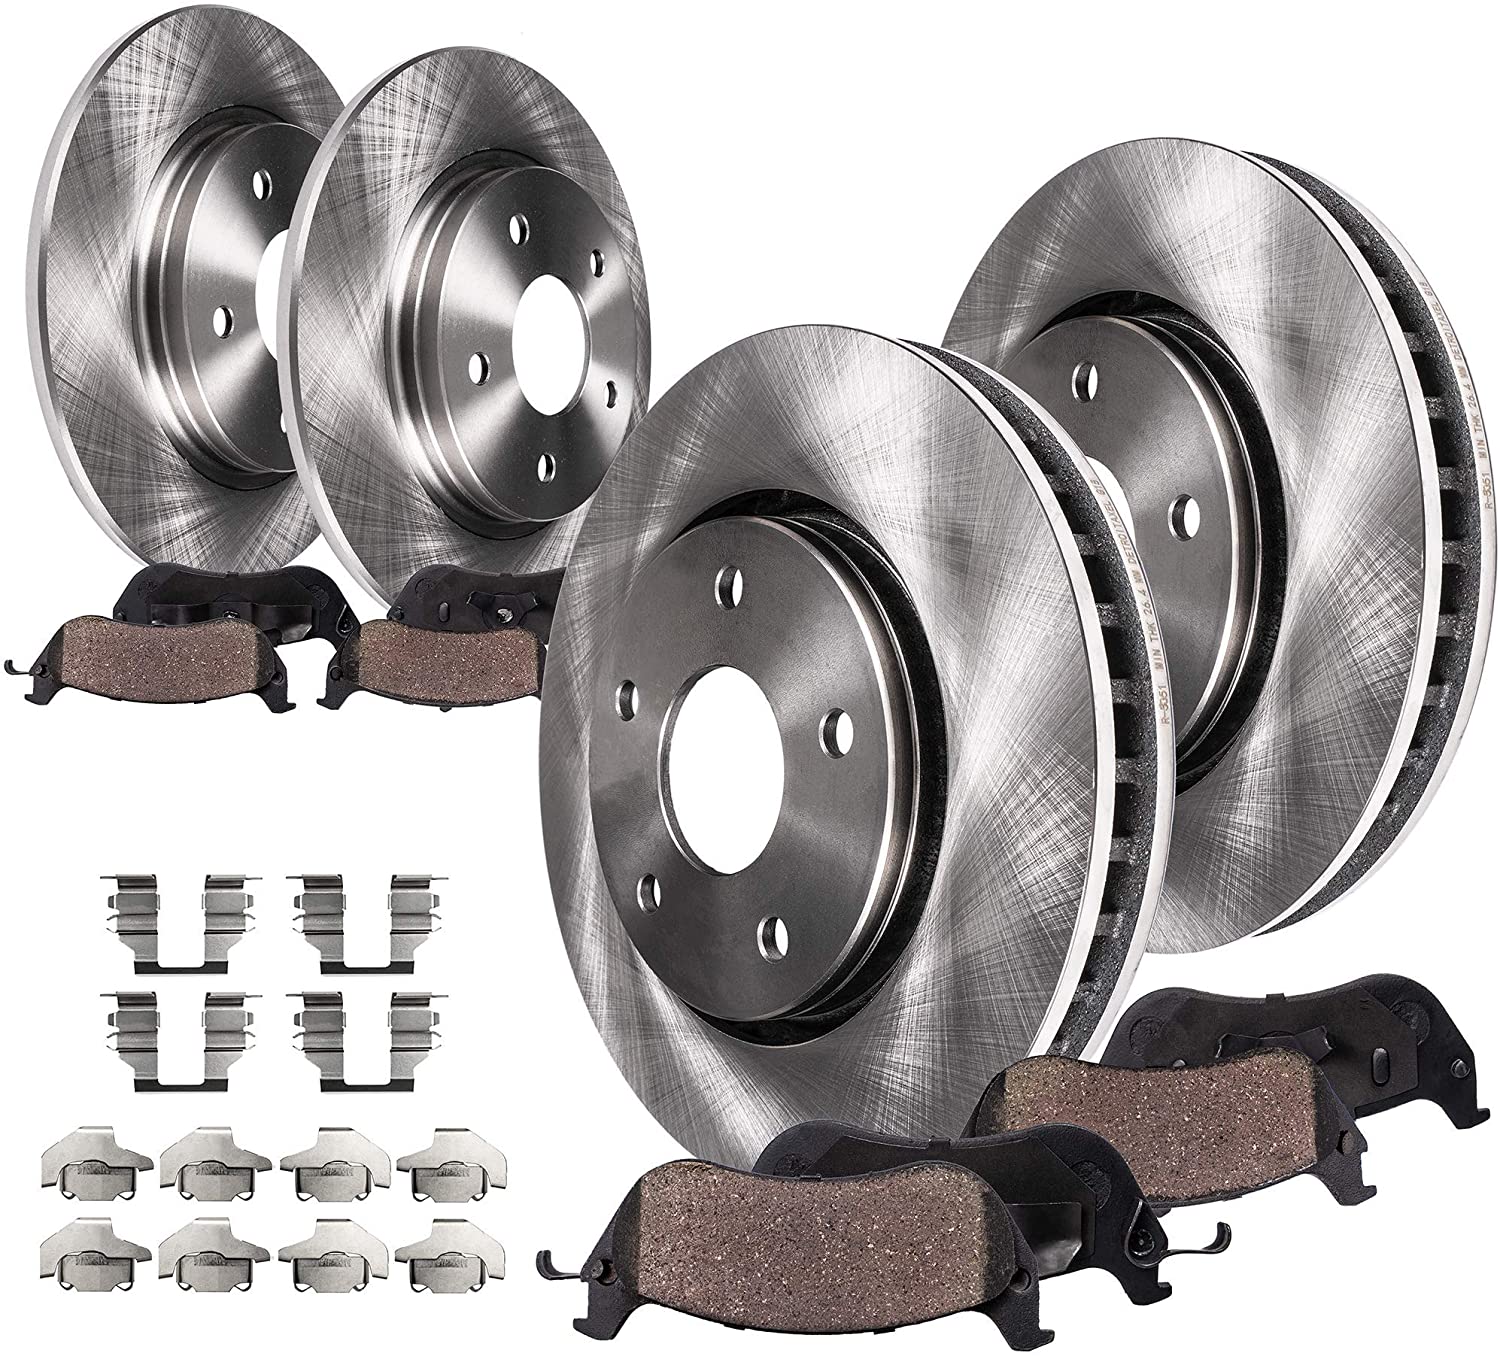 Detroit Axle - 12.01'' FRONT & 11.85'' REAR Brake Rotors & Ceramic Pads w/Hardware fits 2002 2003 2004 2005 Ford Explorer 4-Door Models Only & Mercury Mountaineer